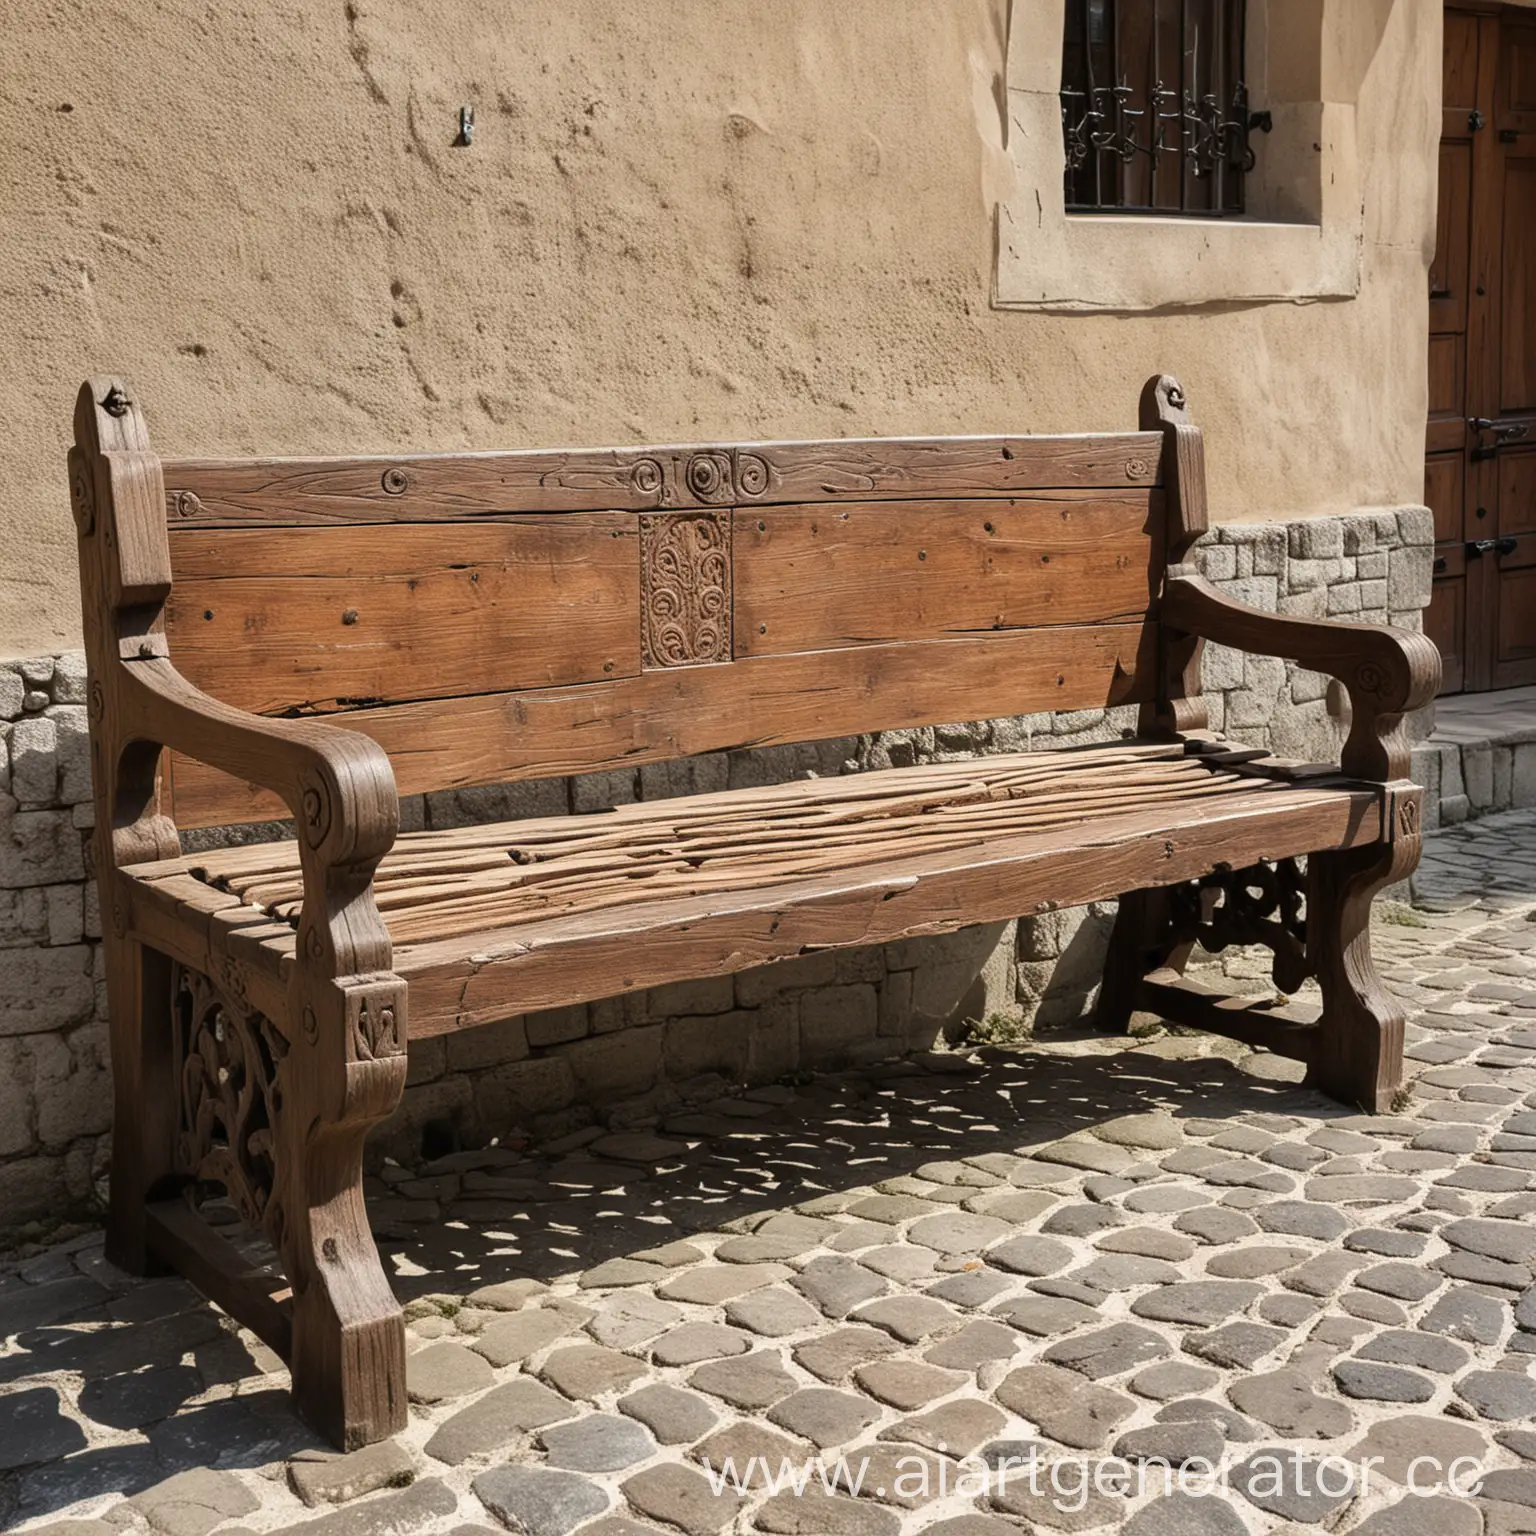 Medieval-Bench-in-a-Rustic-Setting